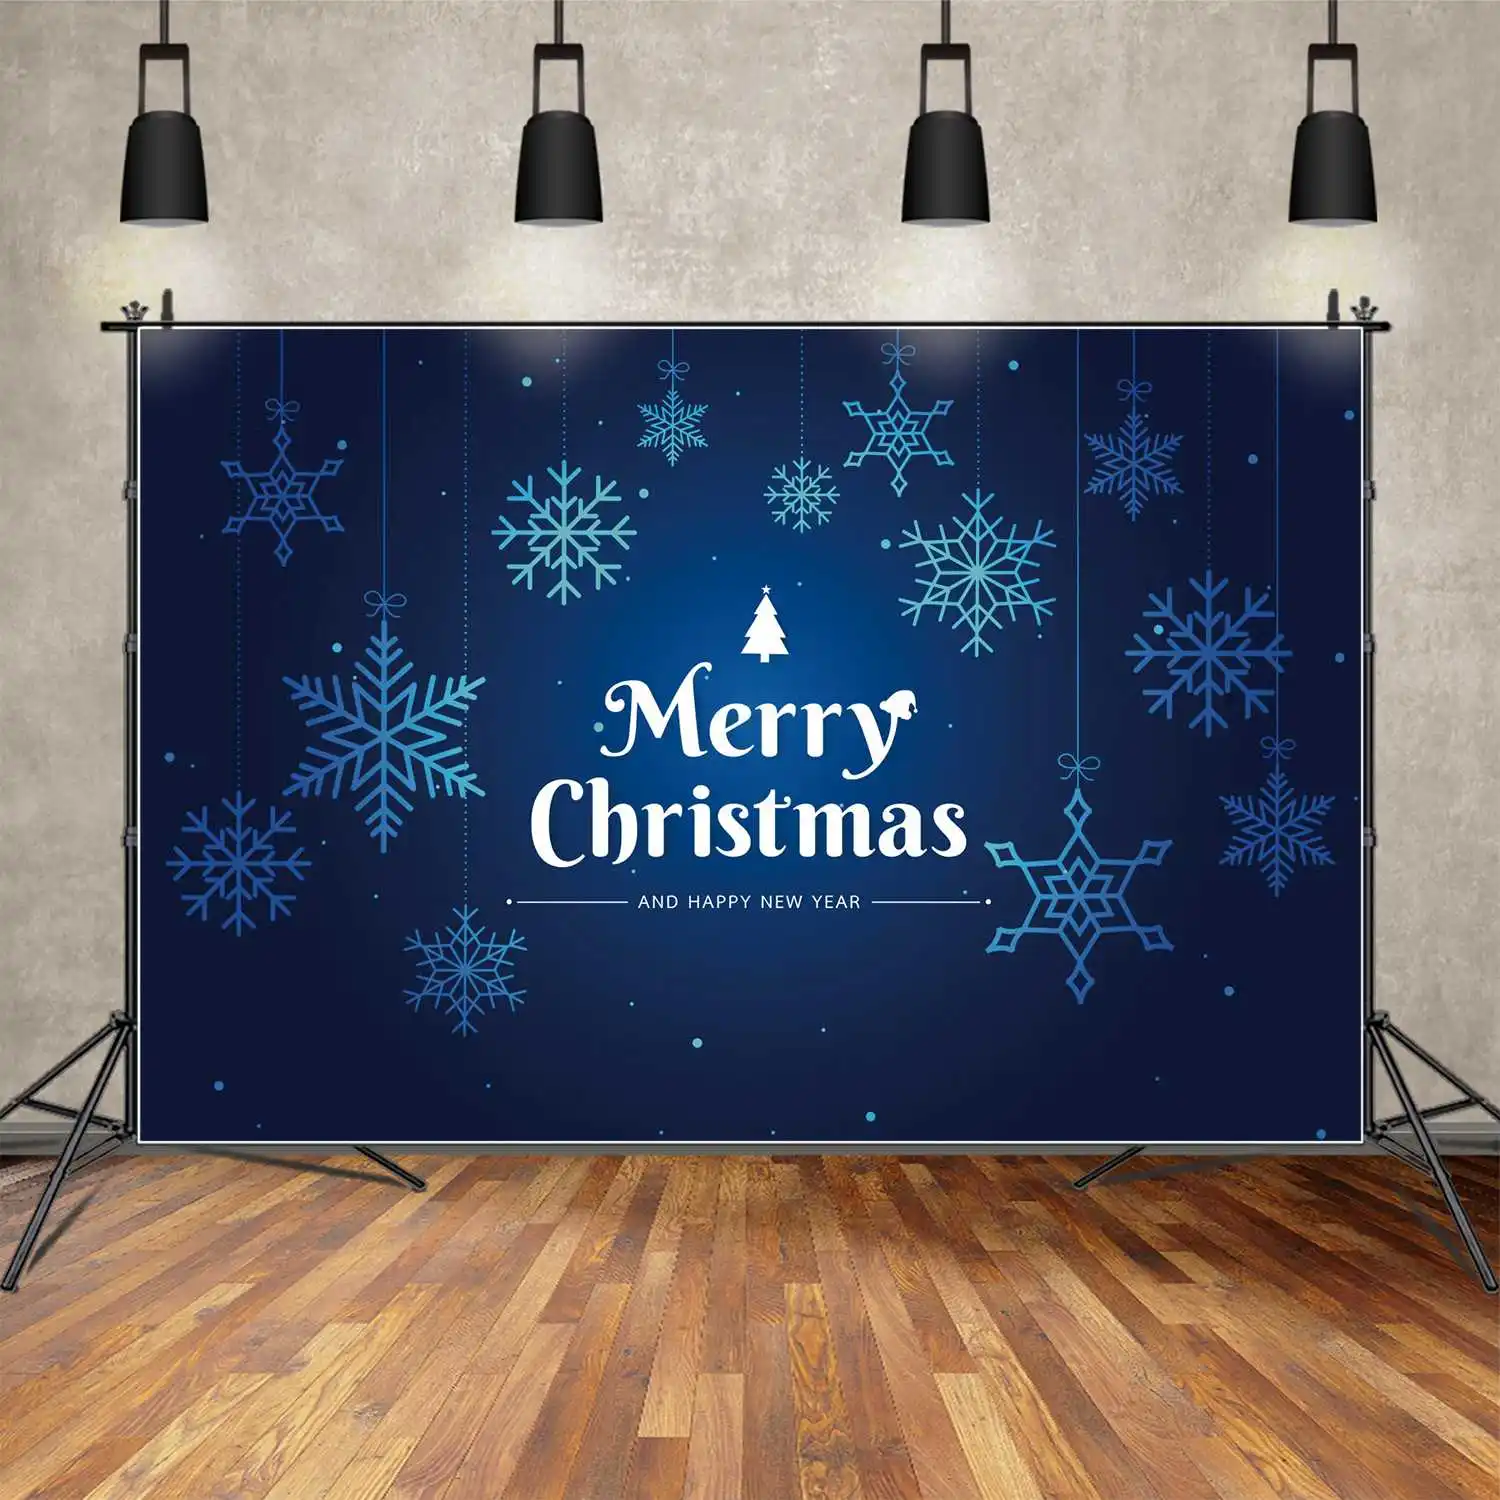 

MOON.QG Backdrop Blue Snowflake Merry Christmas Tree Banner Happy New Year Poster Background Children's Party Decor Photo Booth